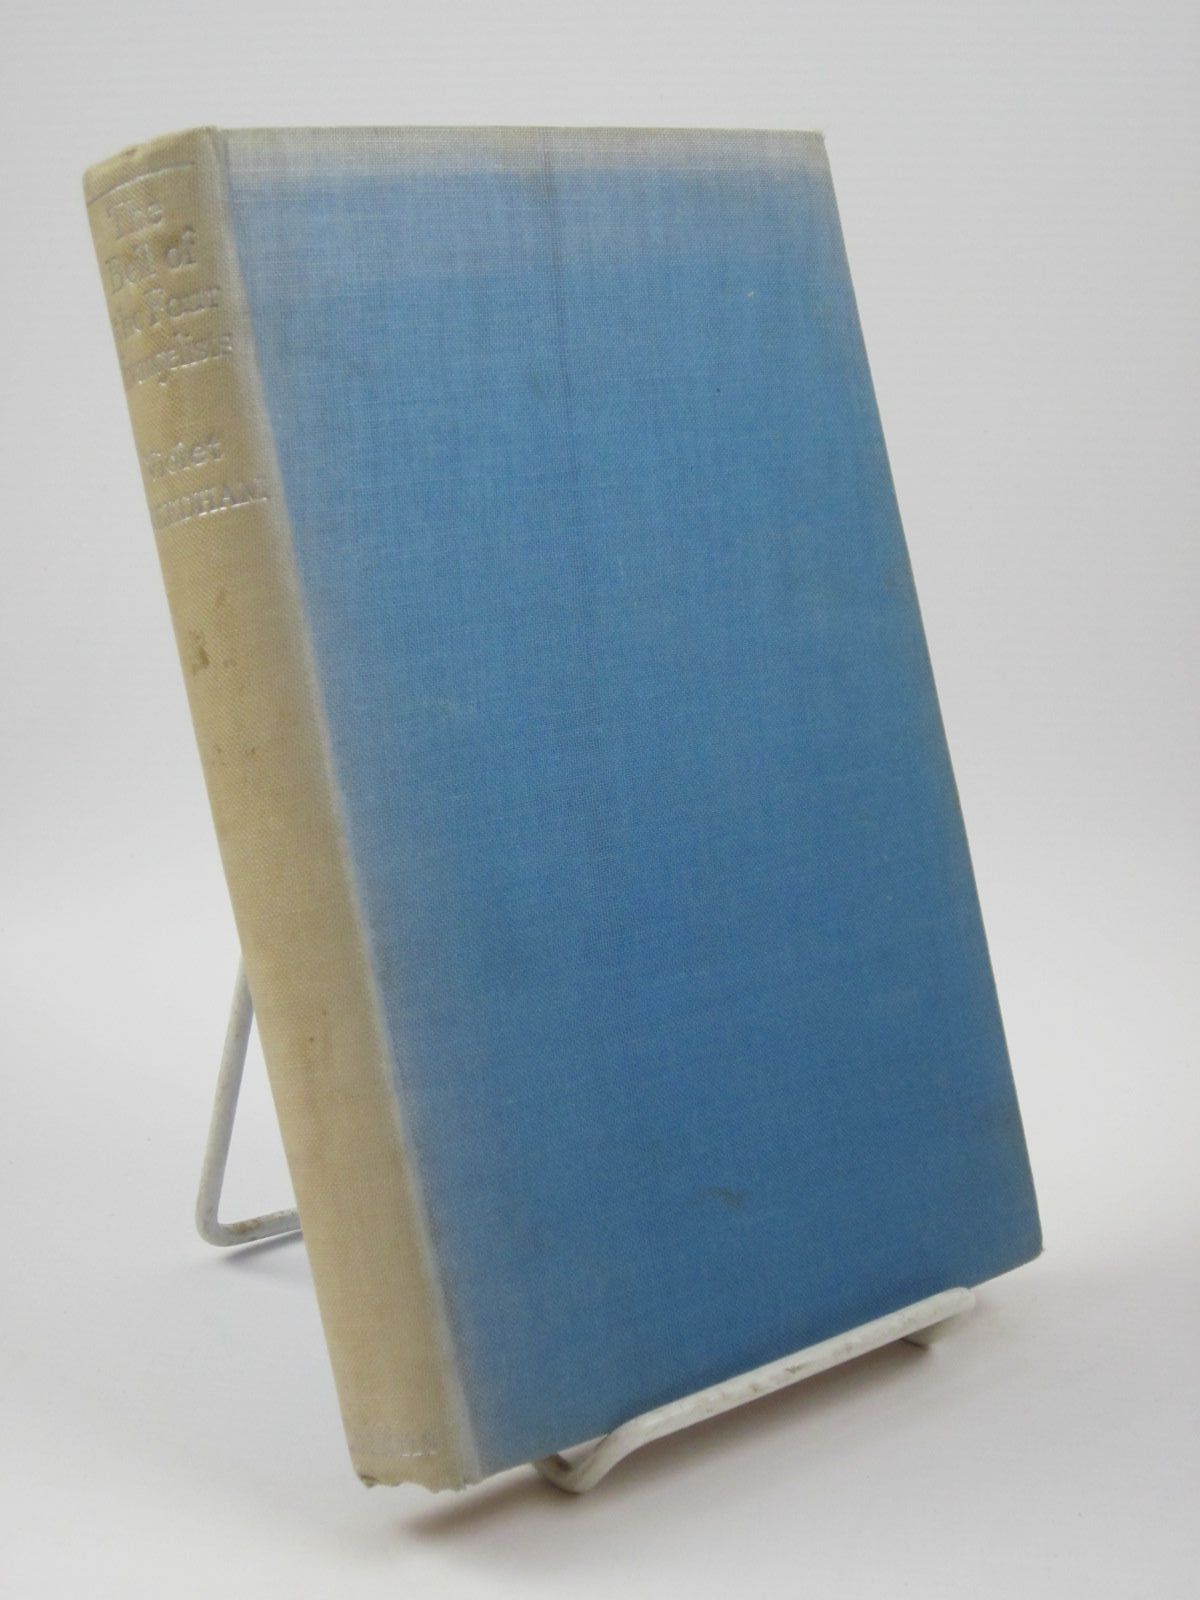 Photo of THE BELL OF THE FOUR EVANGELISTS written by Needham, Violet illustrated by Bruce, Joyce published by Collins (STOCK CODE: 1309979)  for sale by Stella & Rose's Books